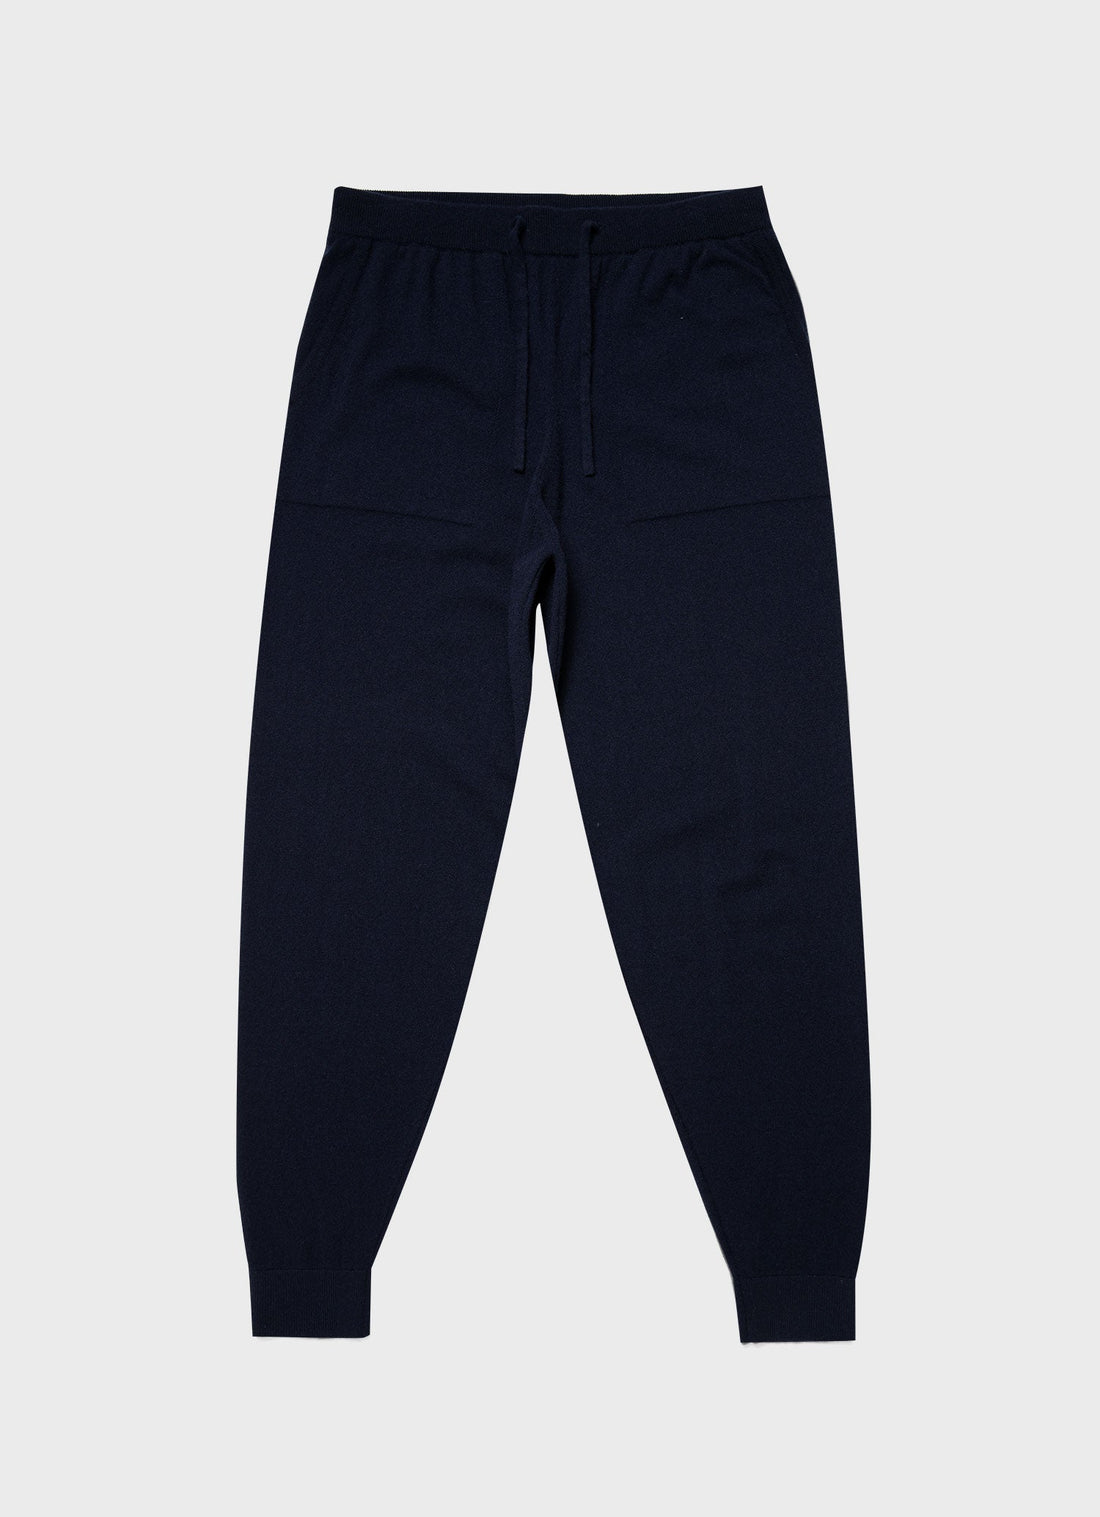 Men's Cashmere Lounge Pant in Navy